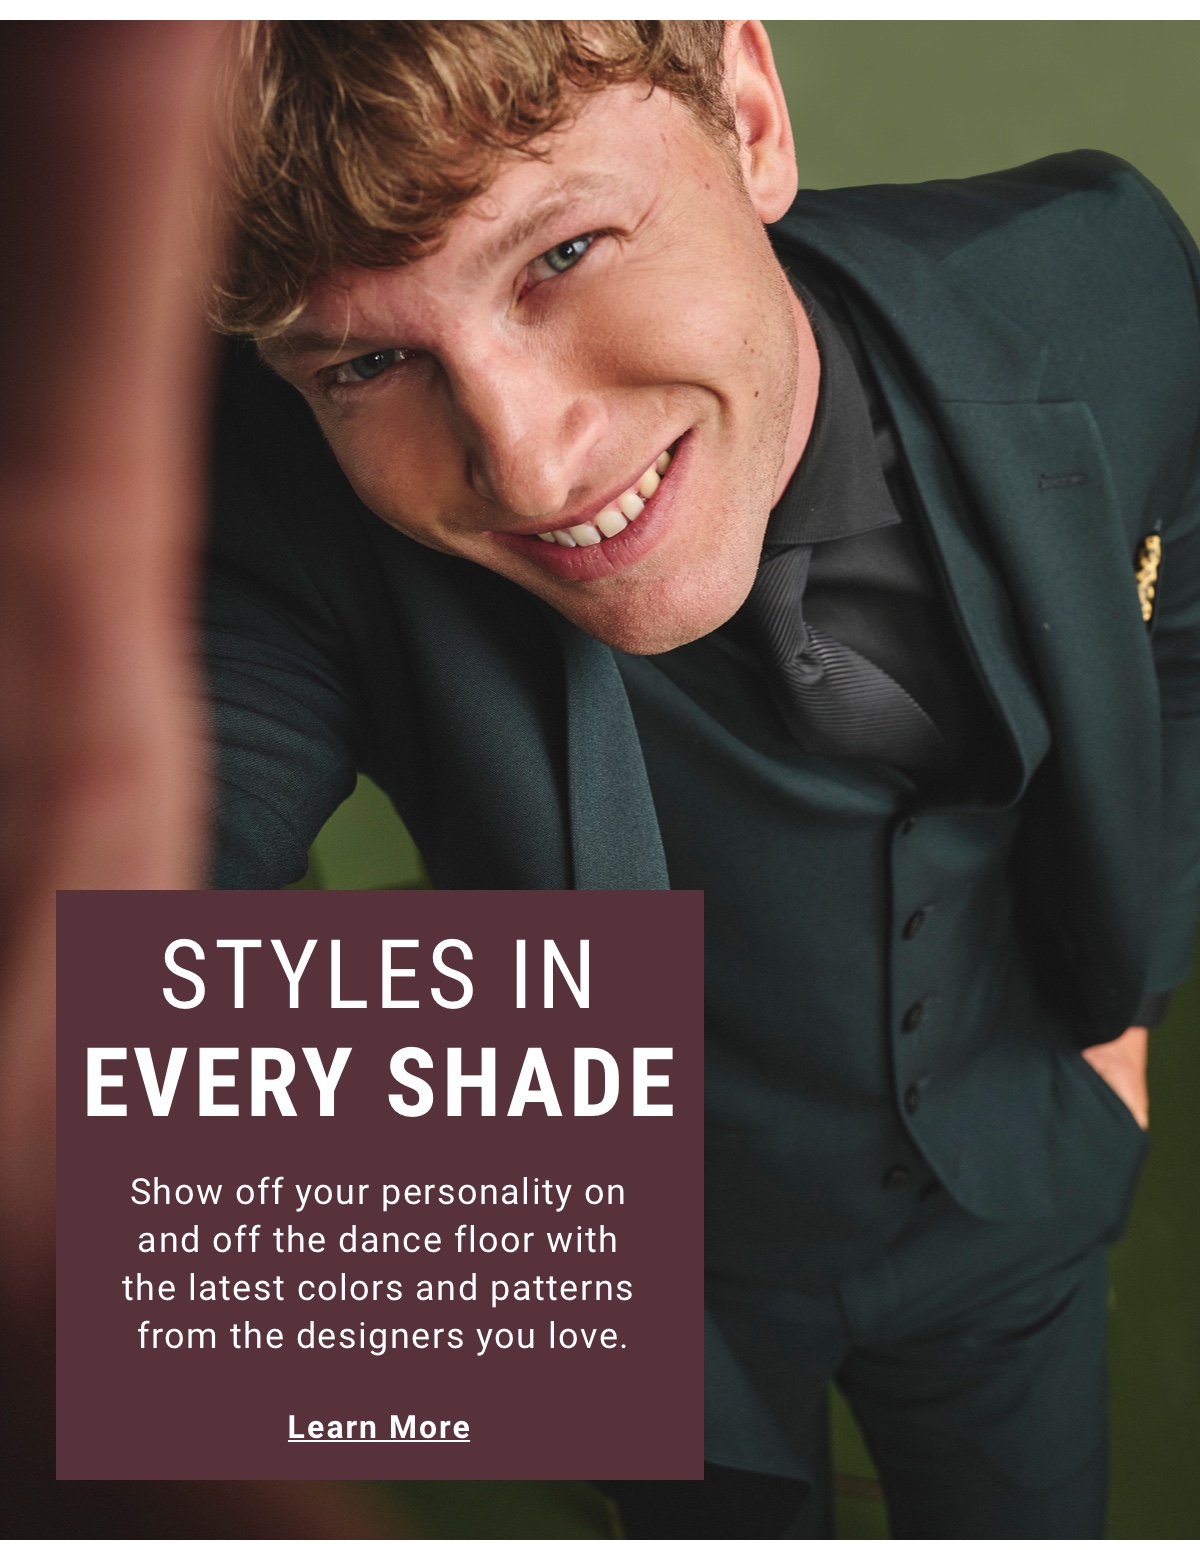 Styles in Every Shade | Show off your personality on and off the dance floor with the latest colors and patterns from the designers you love. - Learn More